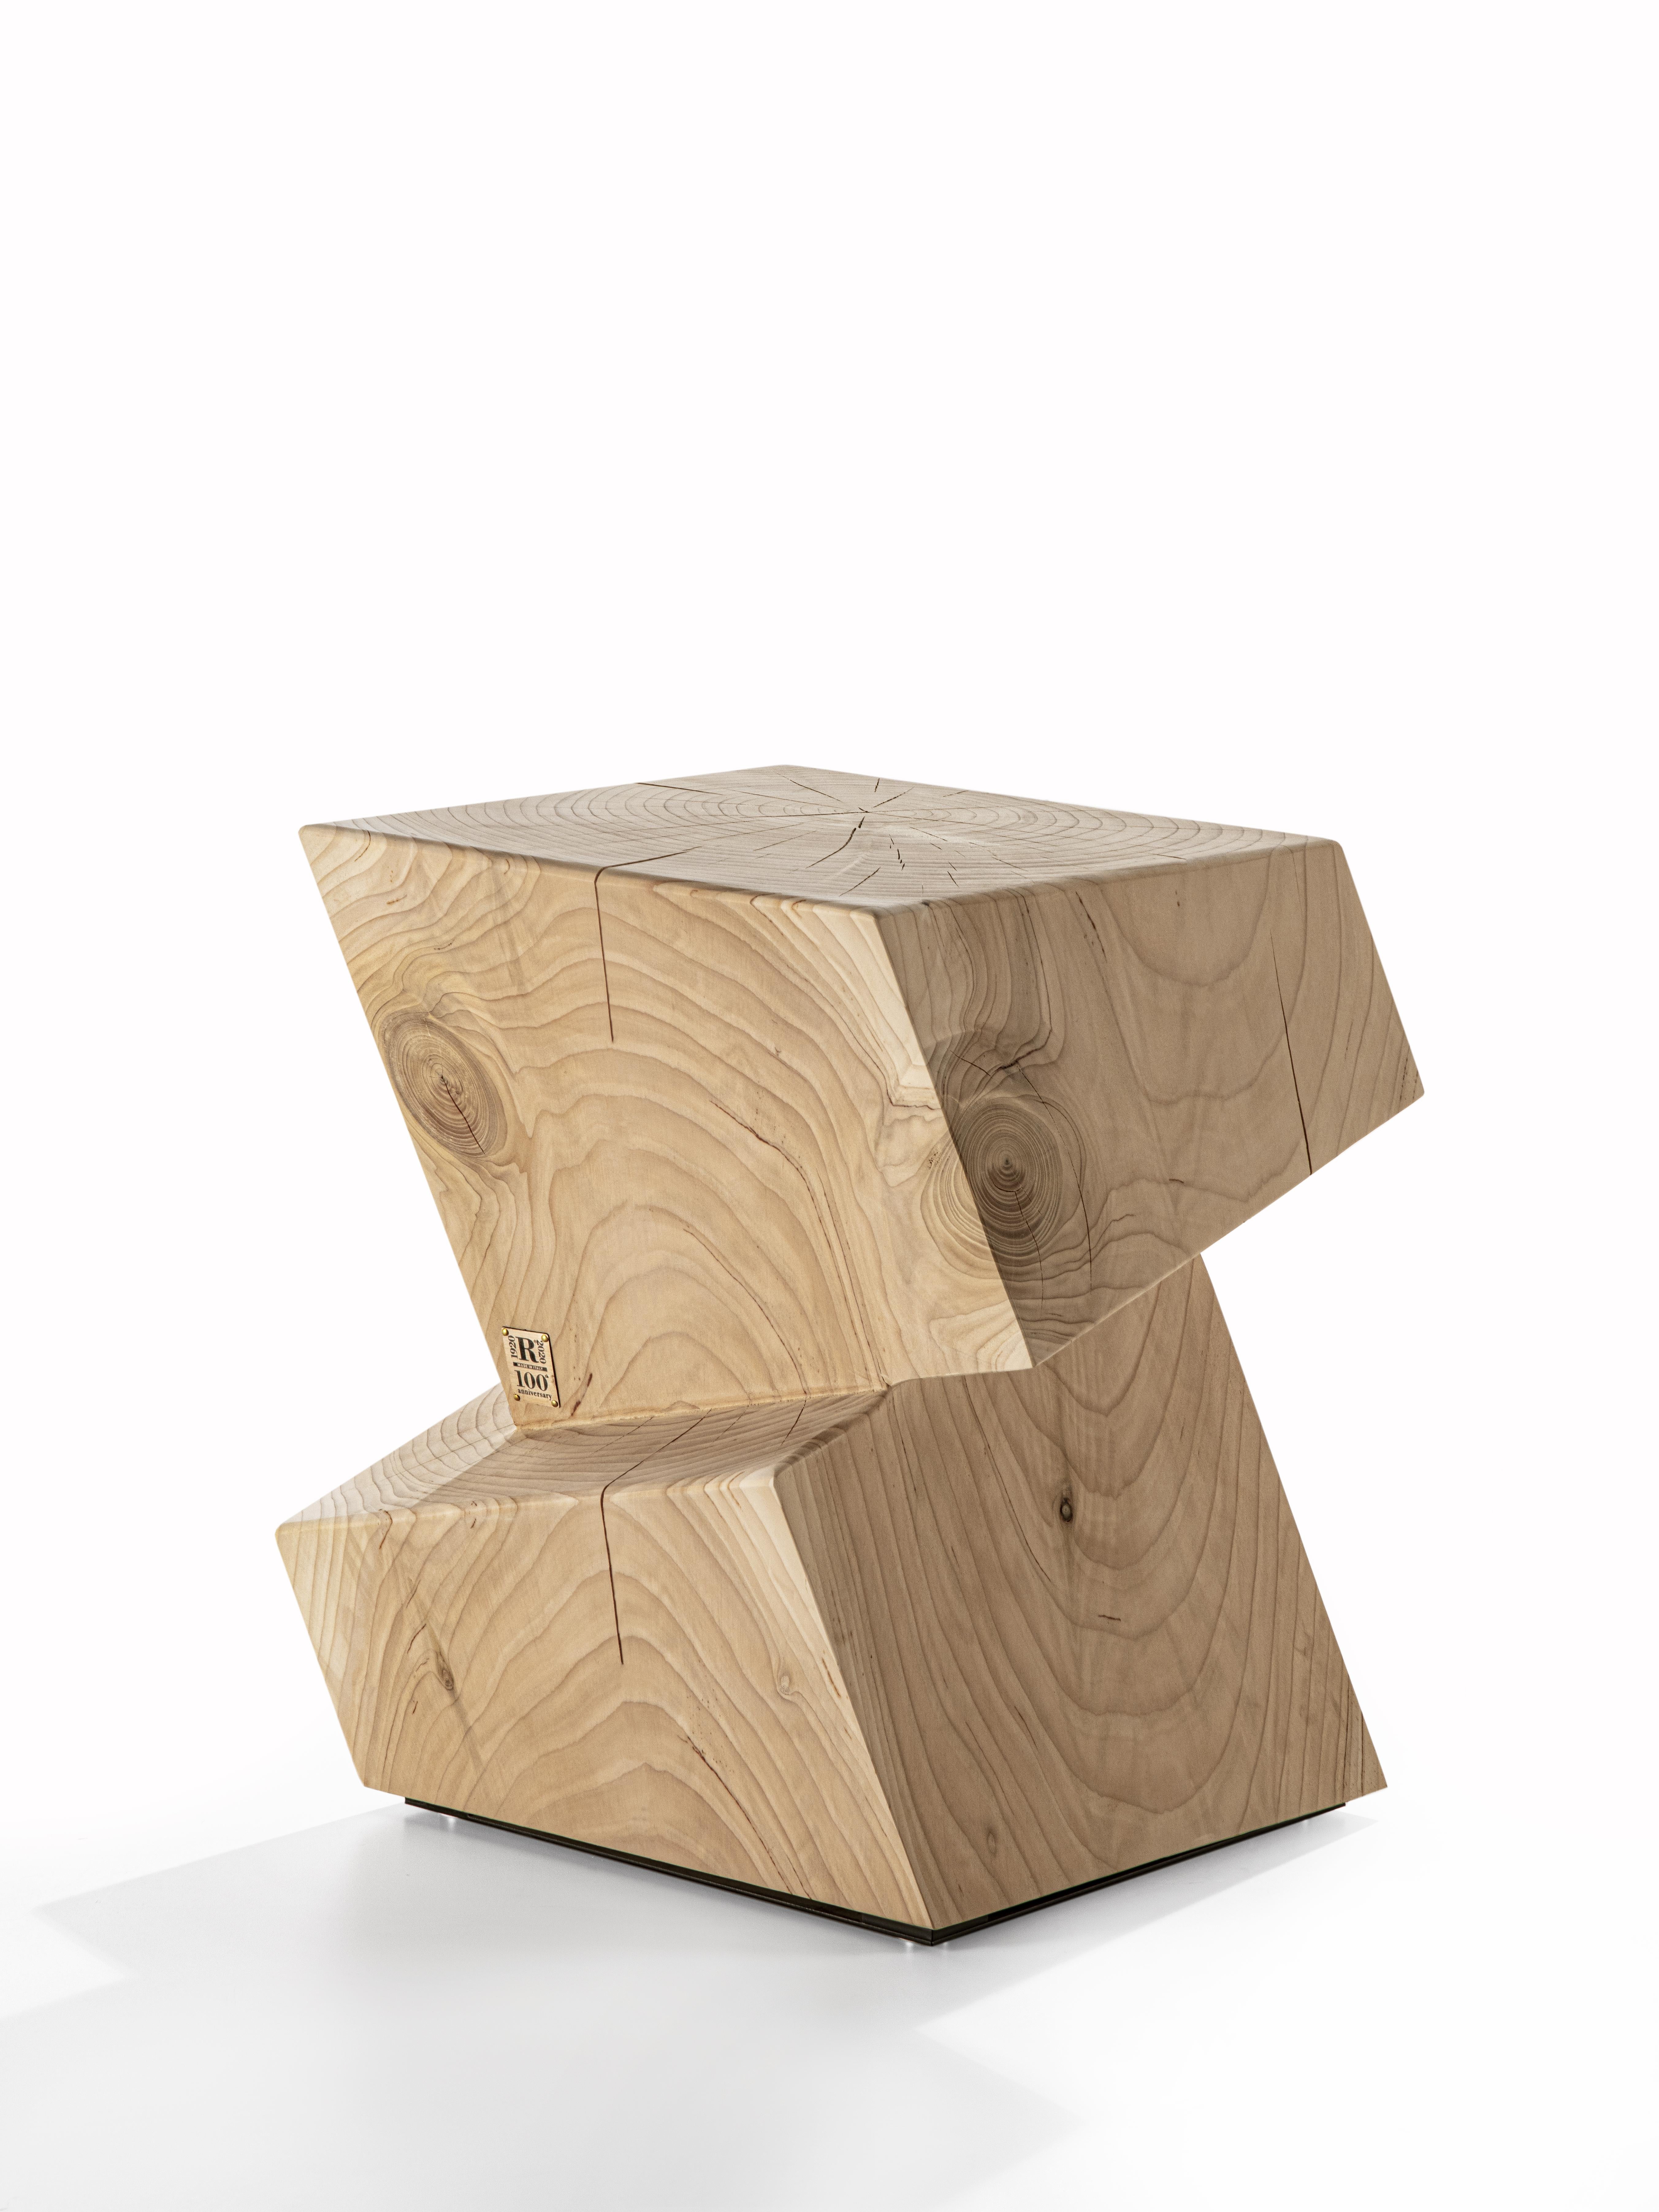 Stool made of a single block of scented cedar with an original design being a tribute to the cubic houses of the Dutch architect Piet Blom.
 